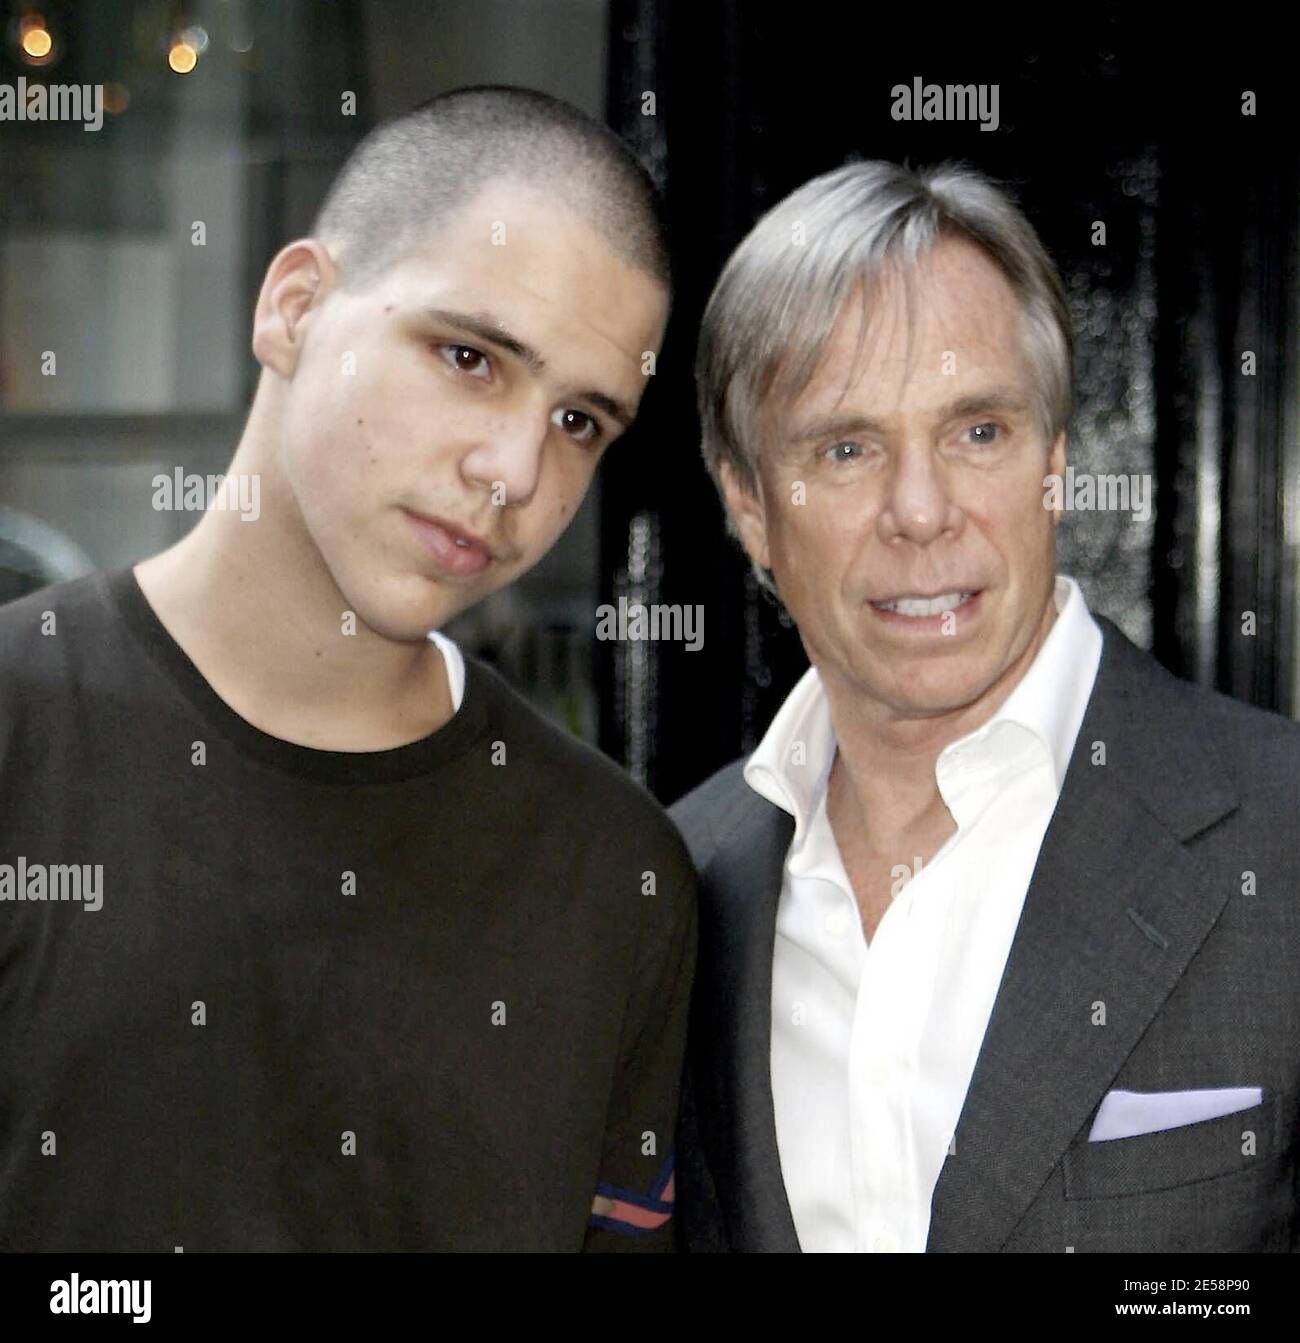 Tommy Hilfiger and son Rich, who is co-ceo of Young Rich and Famous  Entertainment, make their way back into a hotel in Soho, NY. 10/4/07.  [[faa]] Stock Photo - Alamy